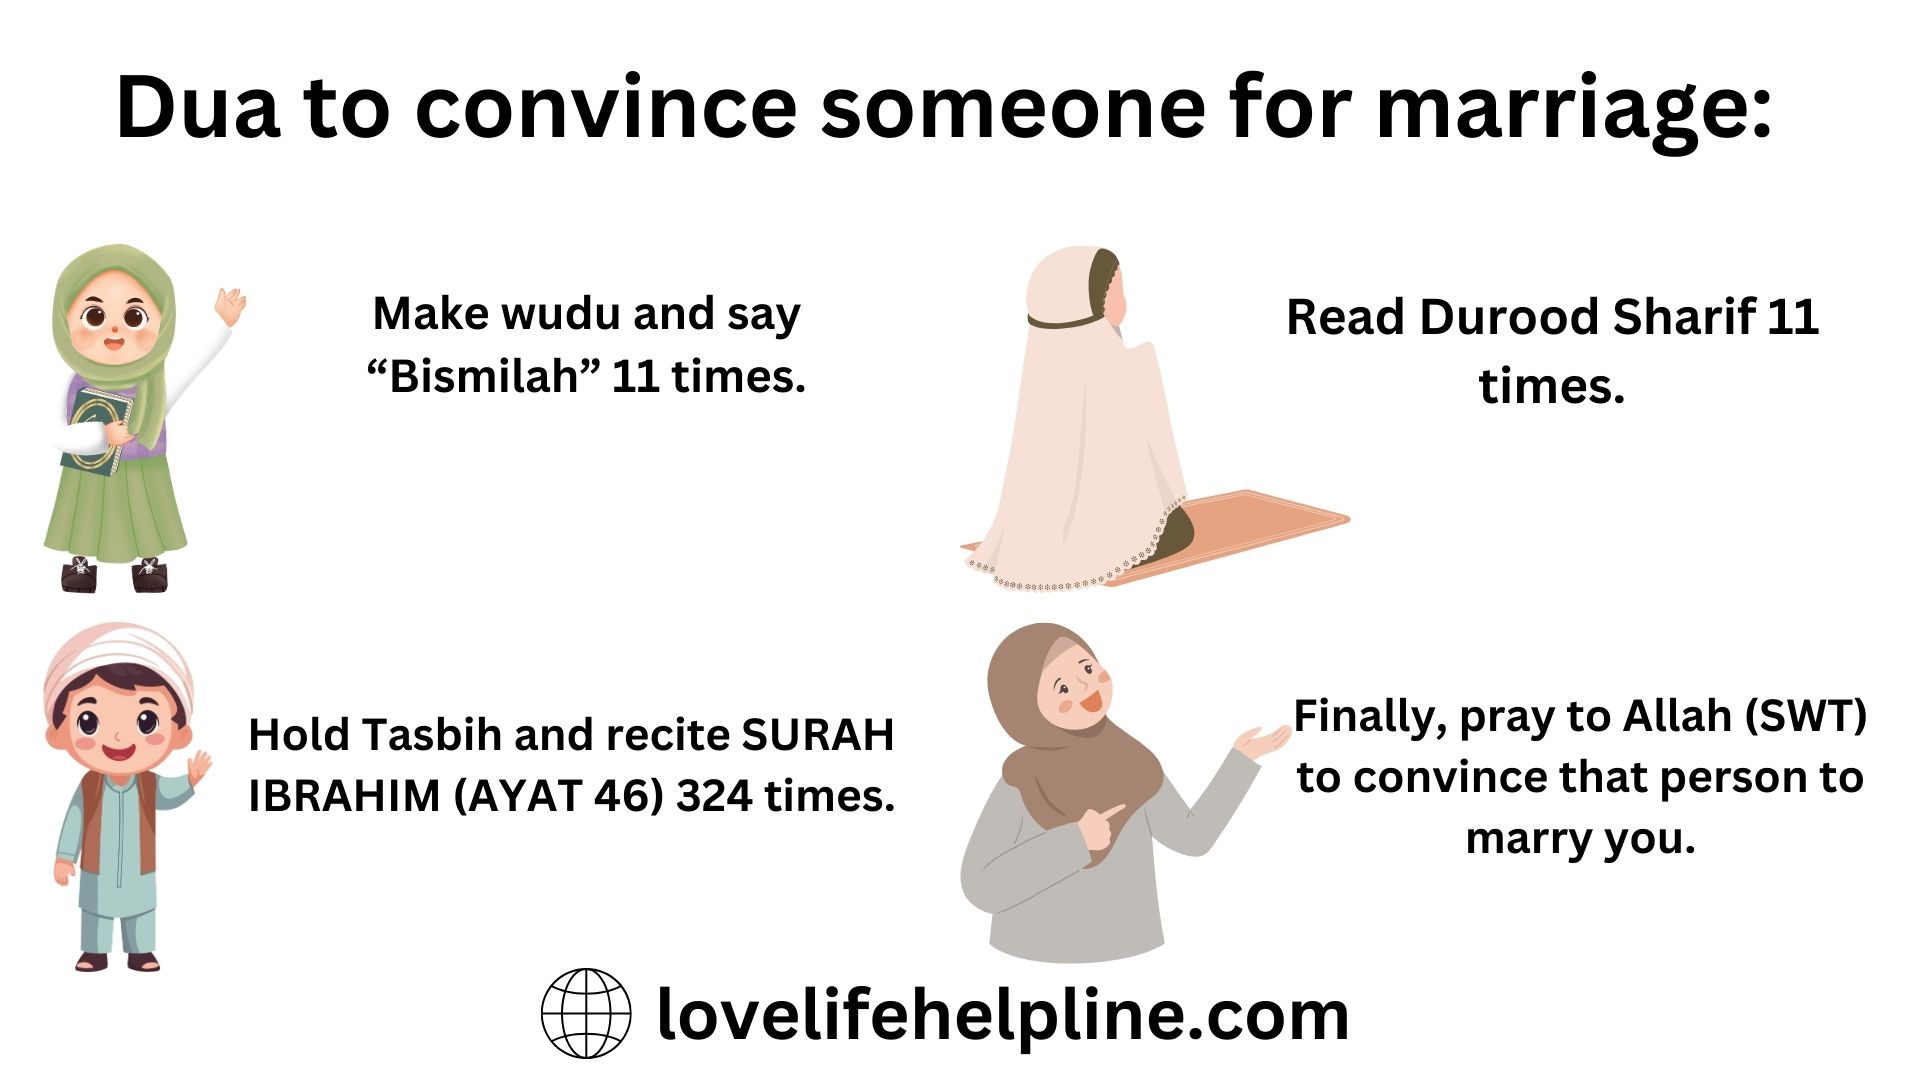 Dua to convince someone for marriage